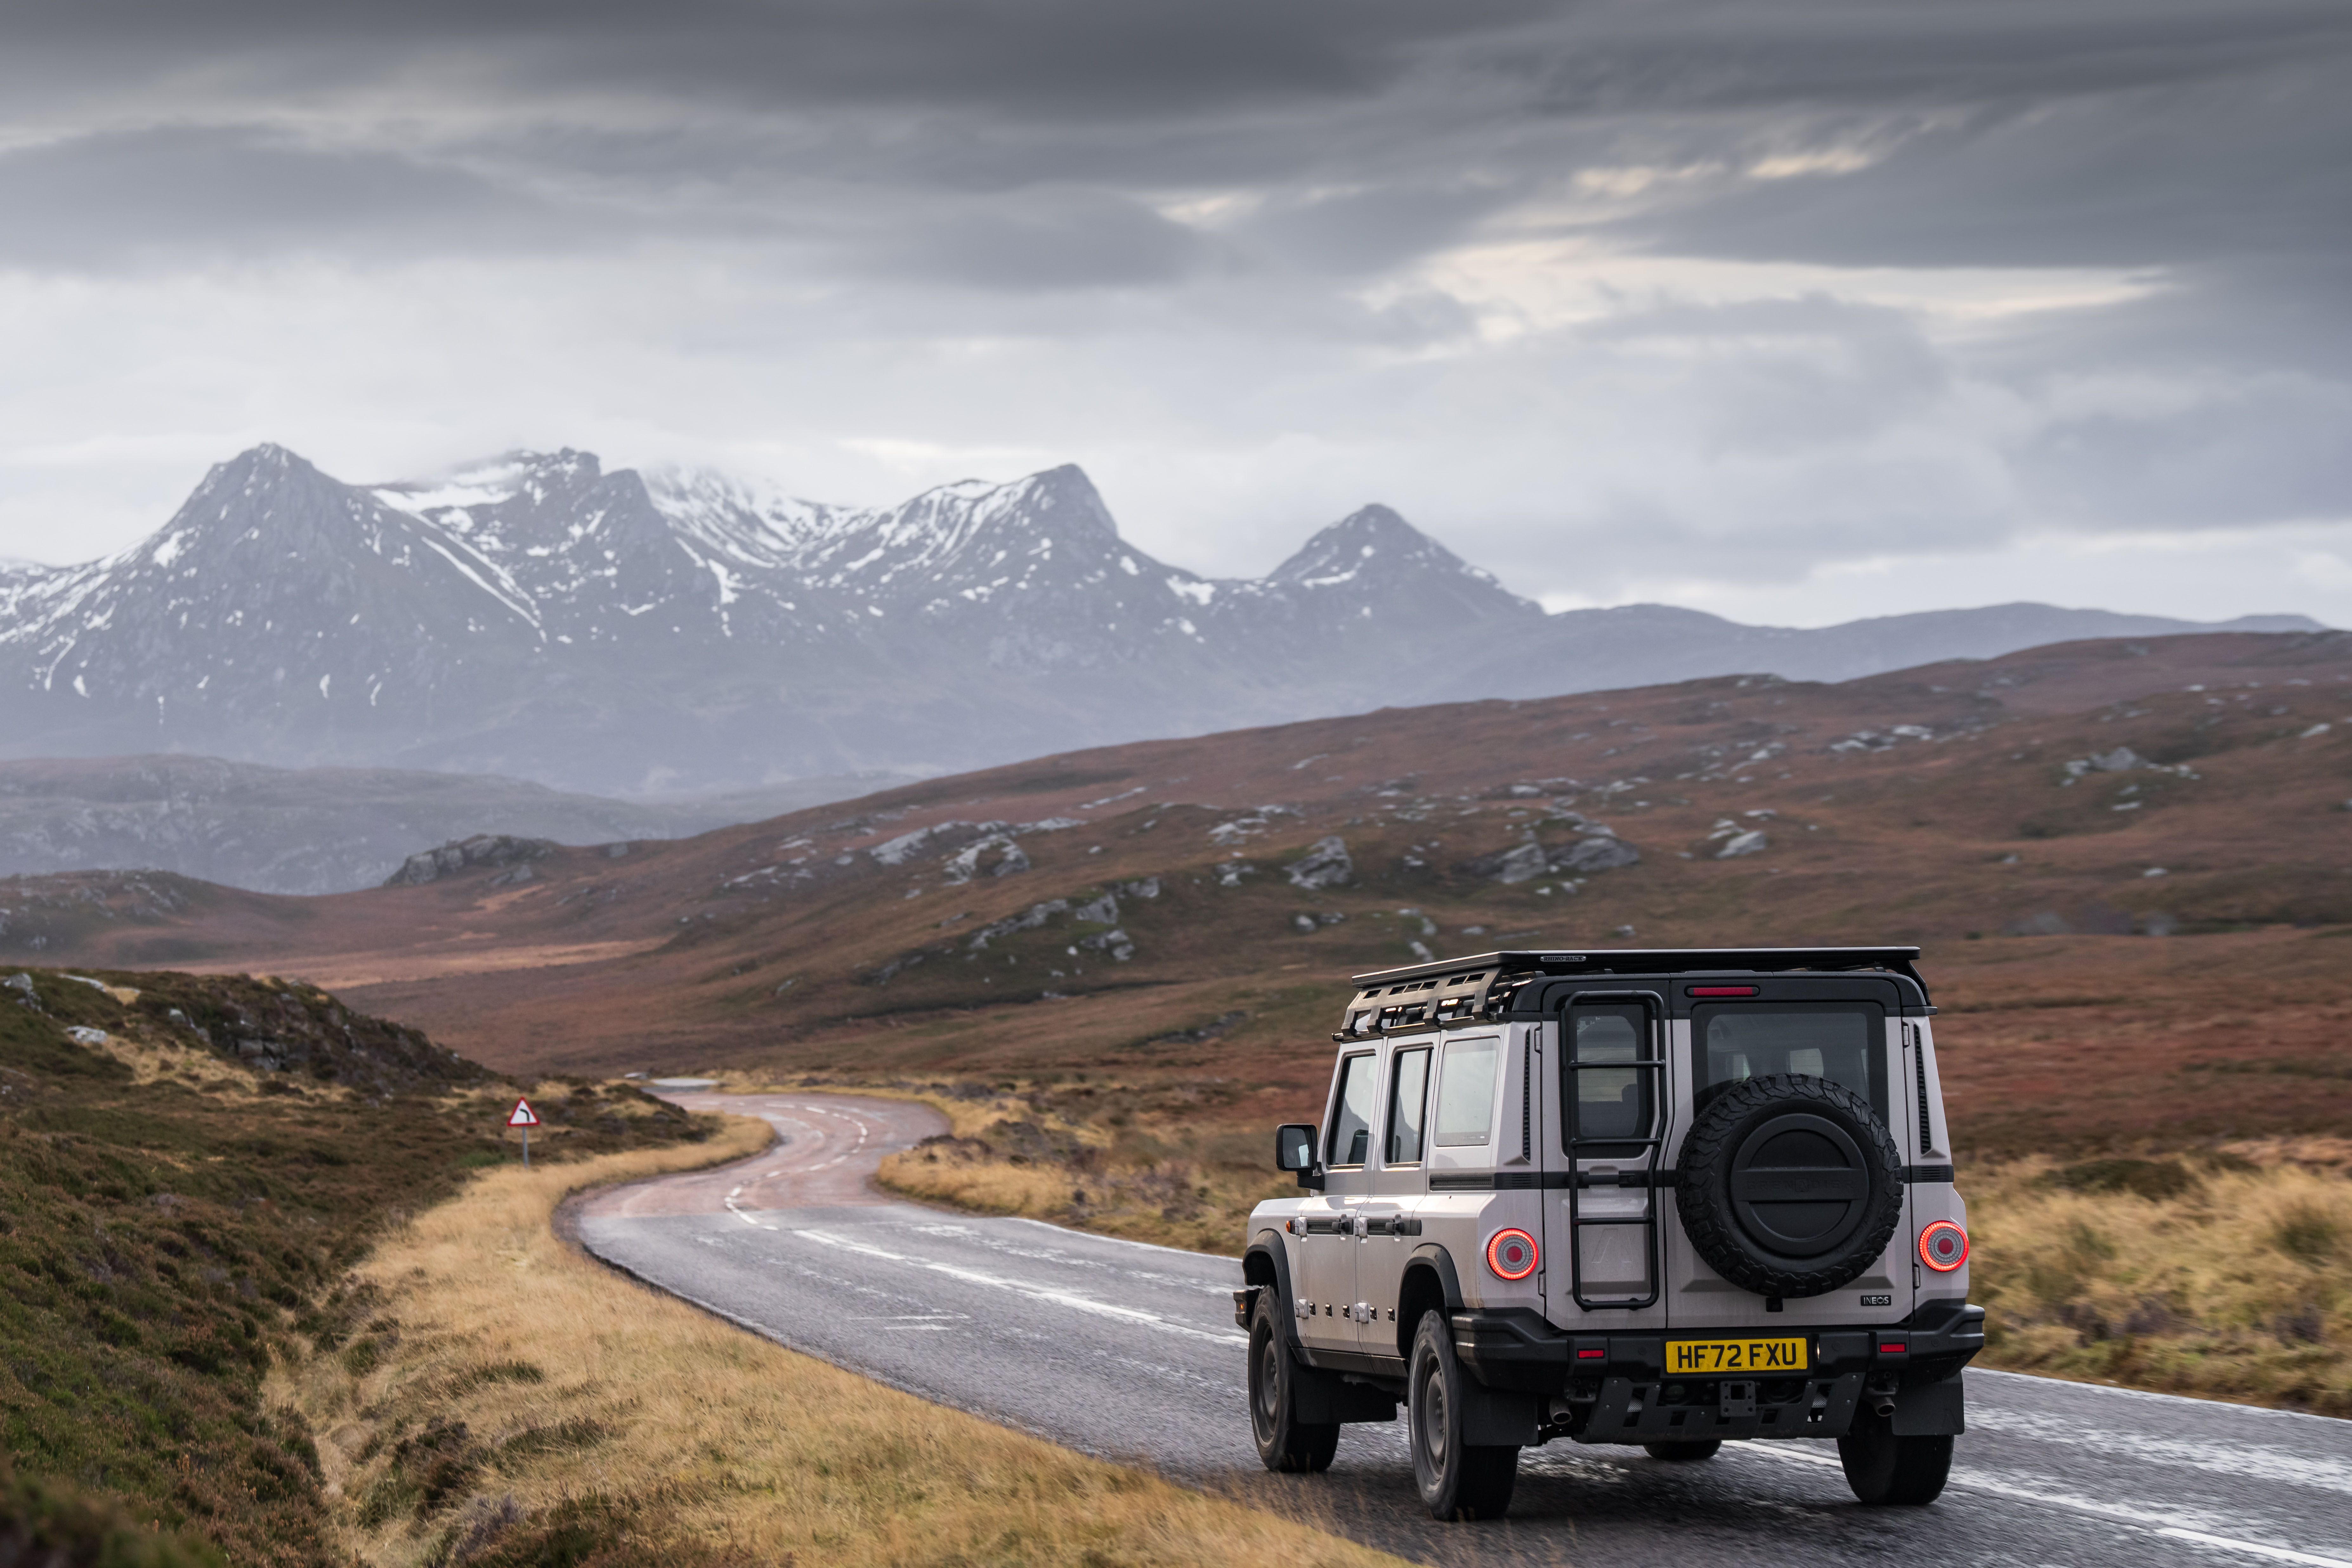 The Ineos Grenadier Is a Land Rover Defender Redux